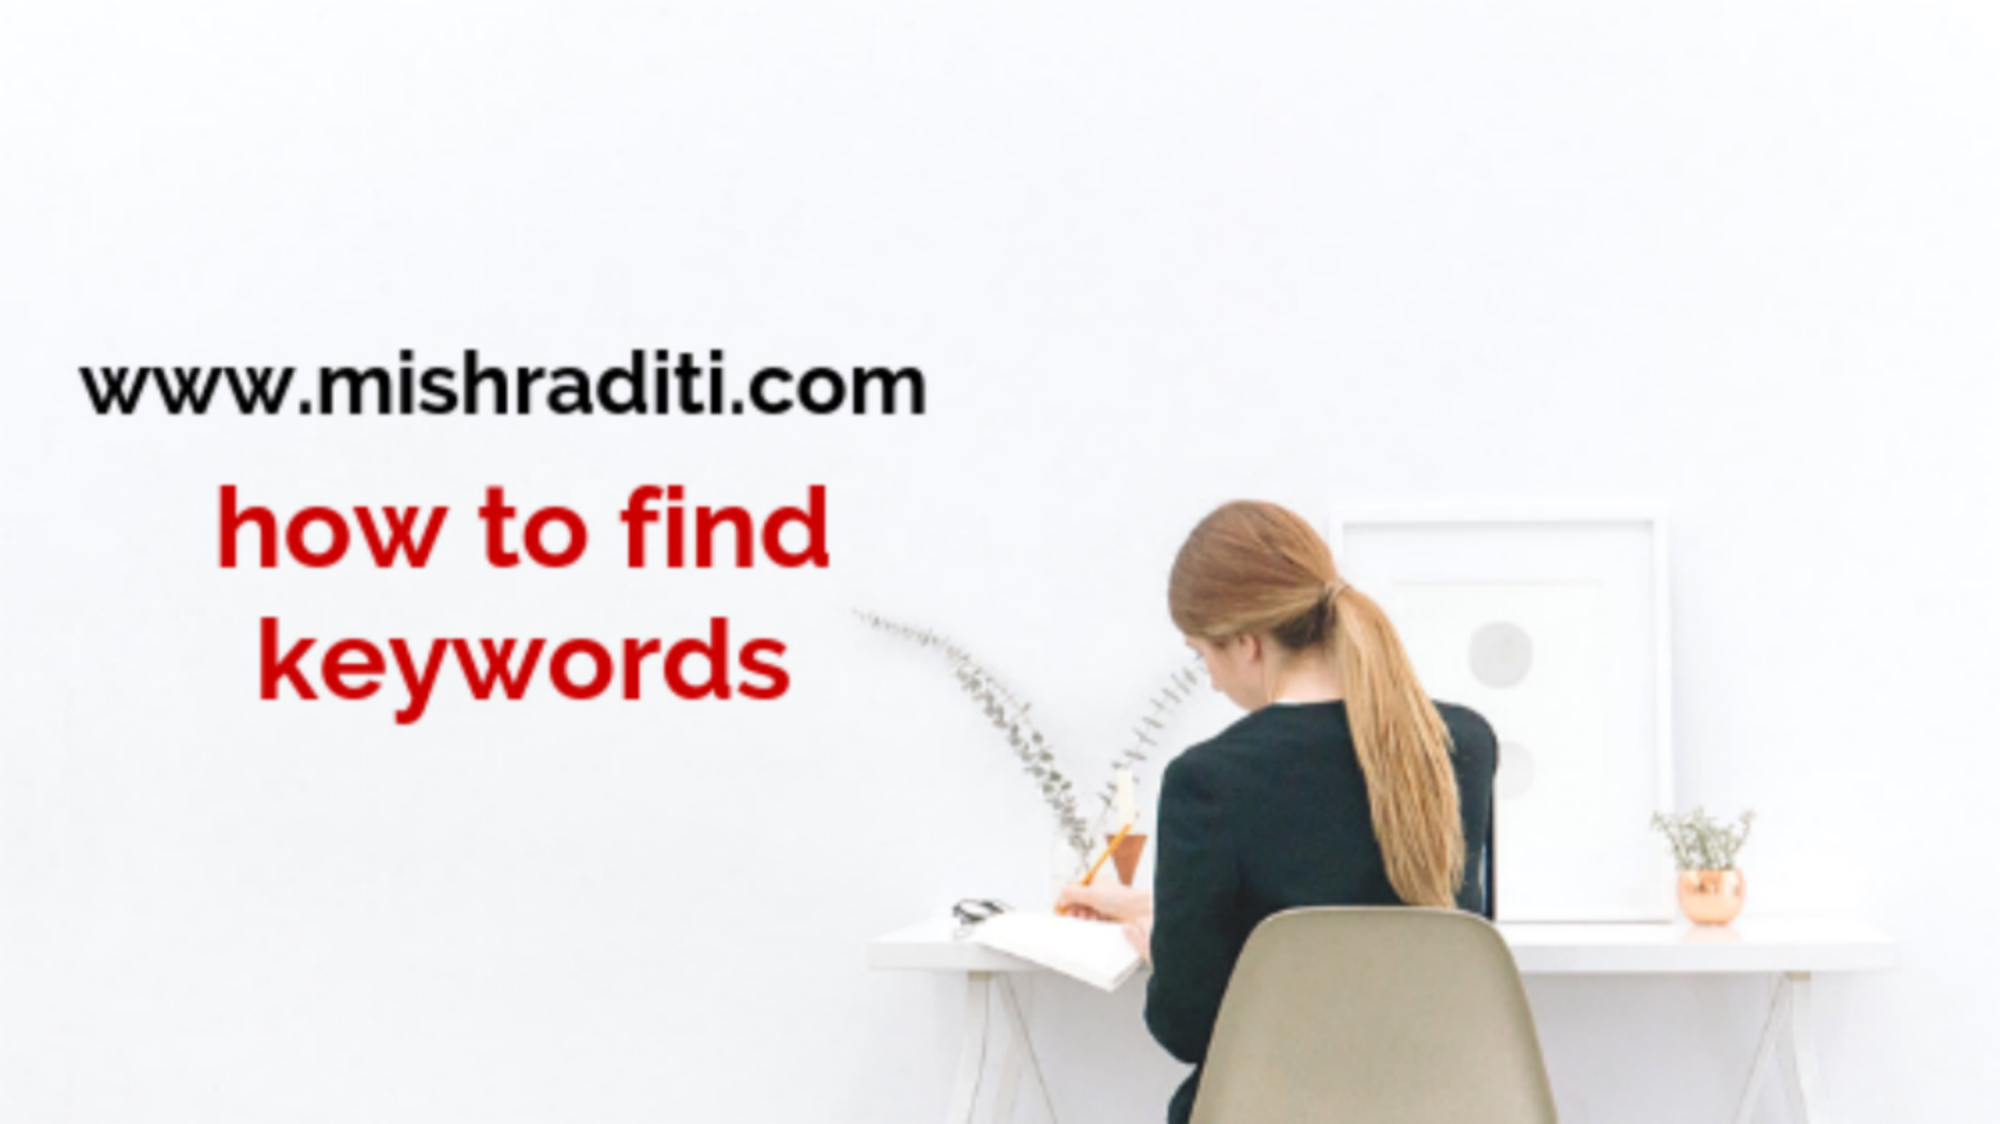 You Need to Know How to Find Keywords